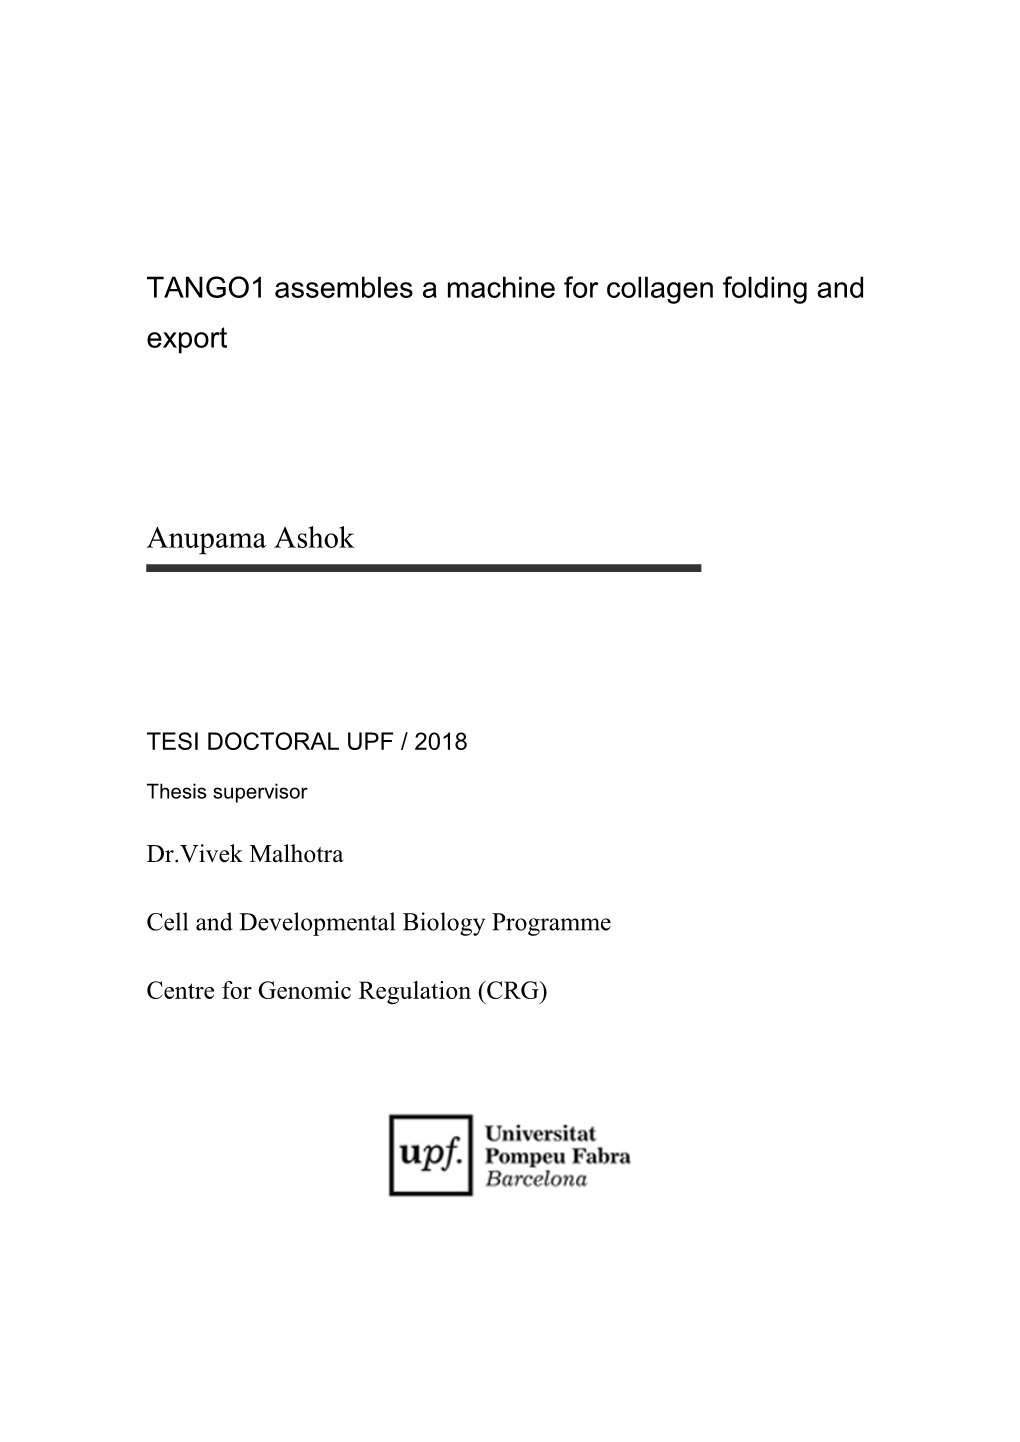 TANGO1 Assembles a Machine for Collagen Folding and Export